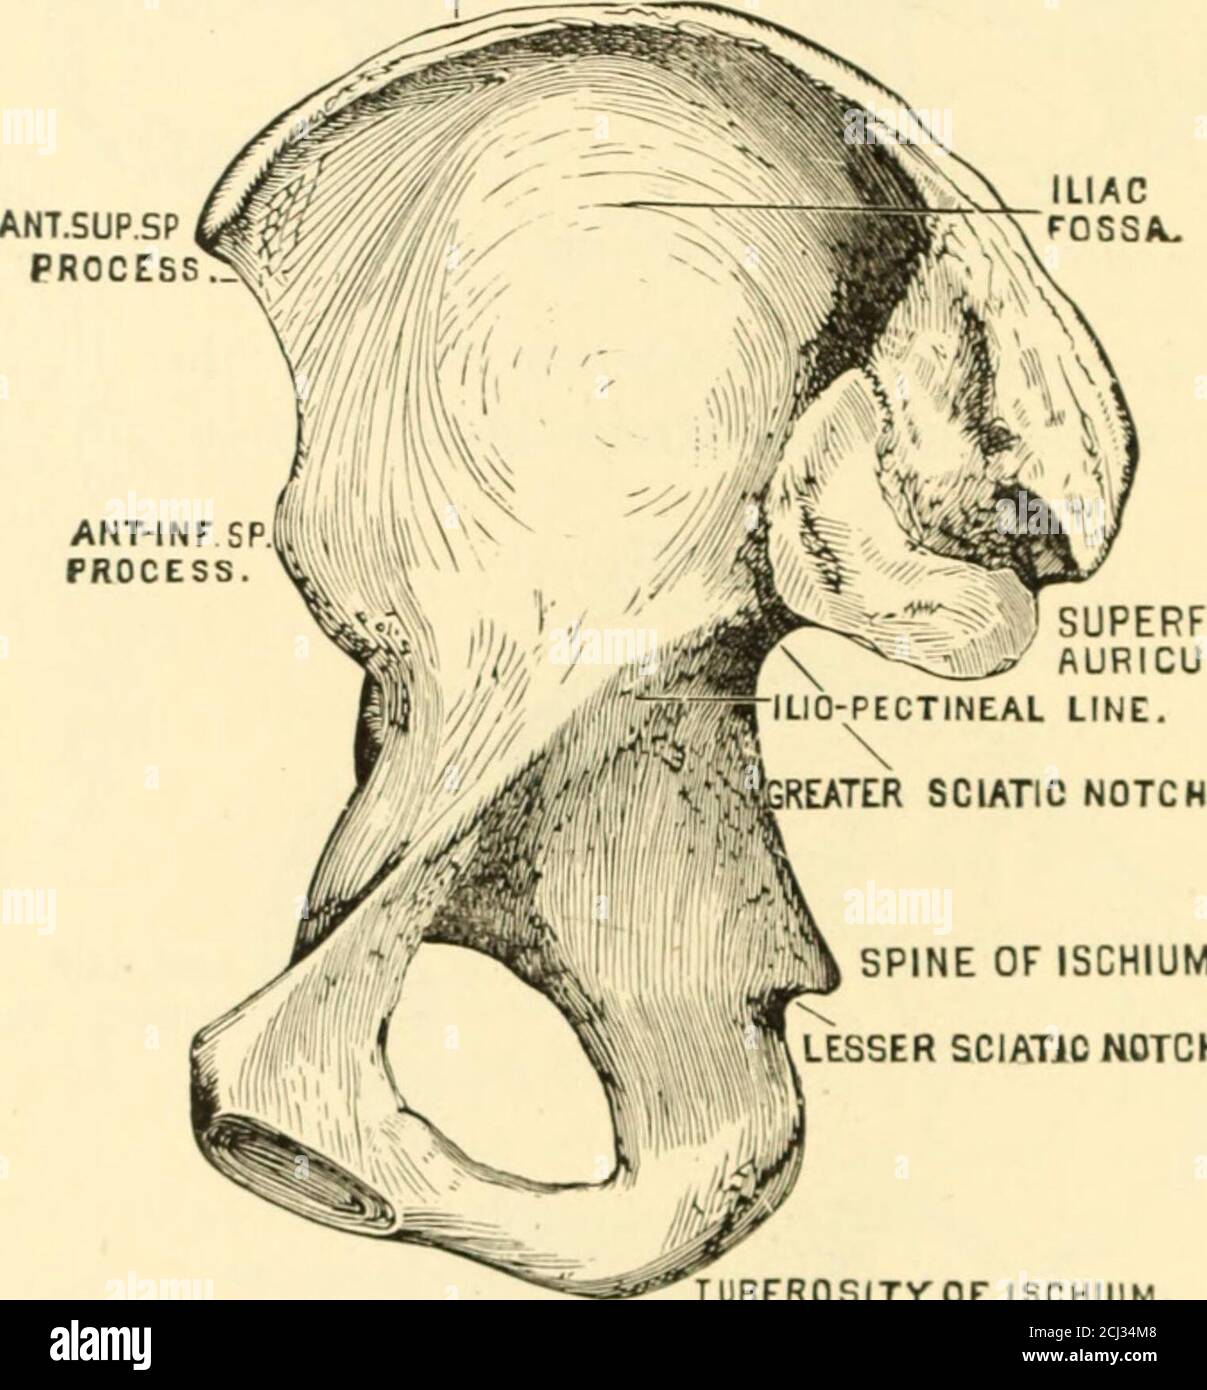 . The science and art of midwifery . O. OBTURATOR FORAMEN. -Outer surface of os Innominatum. ward. The crest of the ilium terminates, front and rear, in bonyprominences, termed respectively the anterior and posterior superior 144 LABOlt. spinous processes. Beneath the upper spines, and separated from themby curved indentations, are two lower, less sharply defined projections,termed the anterior and posterior inferior spinous processes. Behindthe iliac fossa is situated an ear-shaped articular surface, the super-ficies auricularis, which corresponds to the surface of similar namedescribed upon Stock Photo